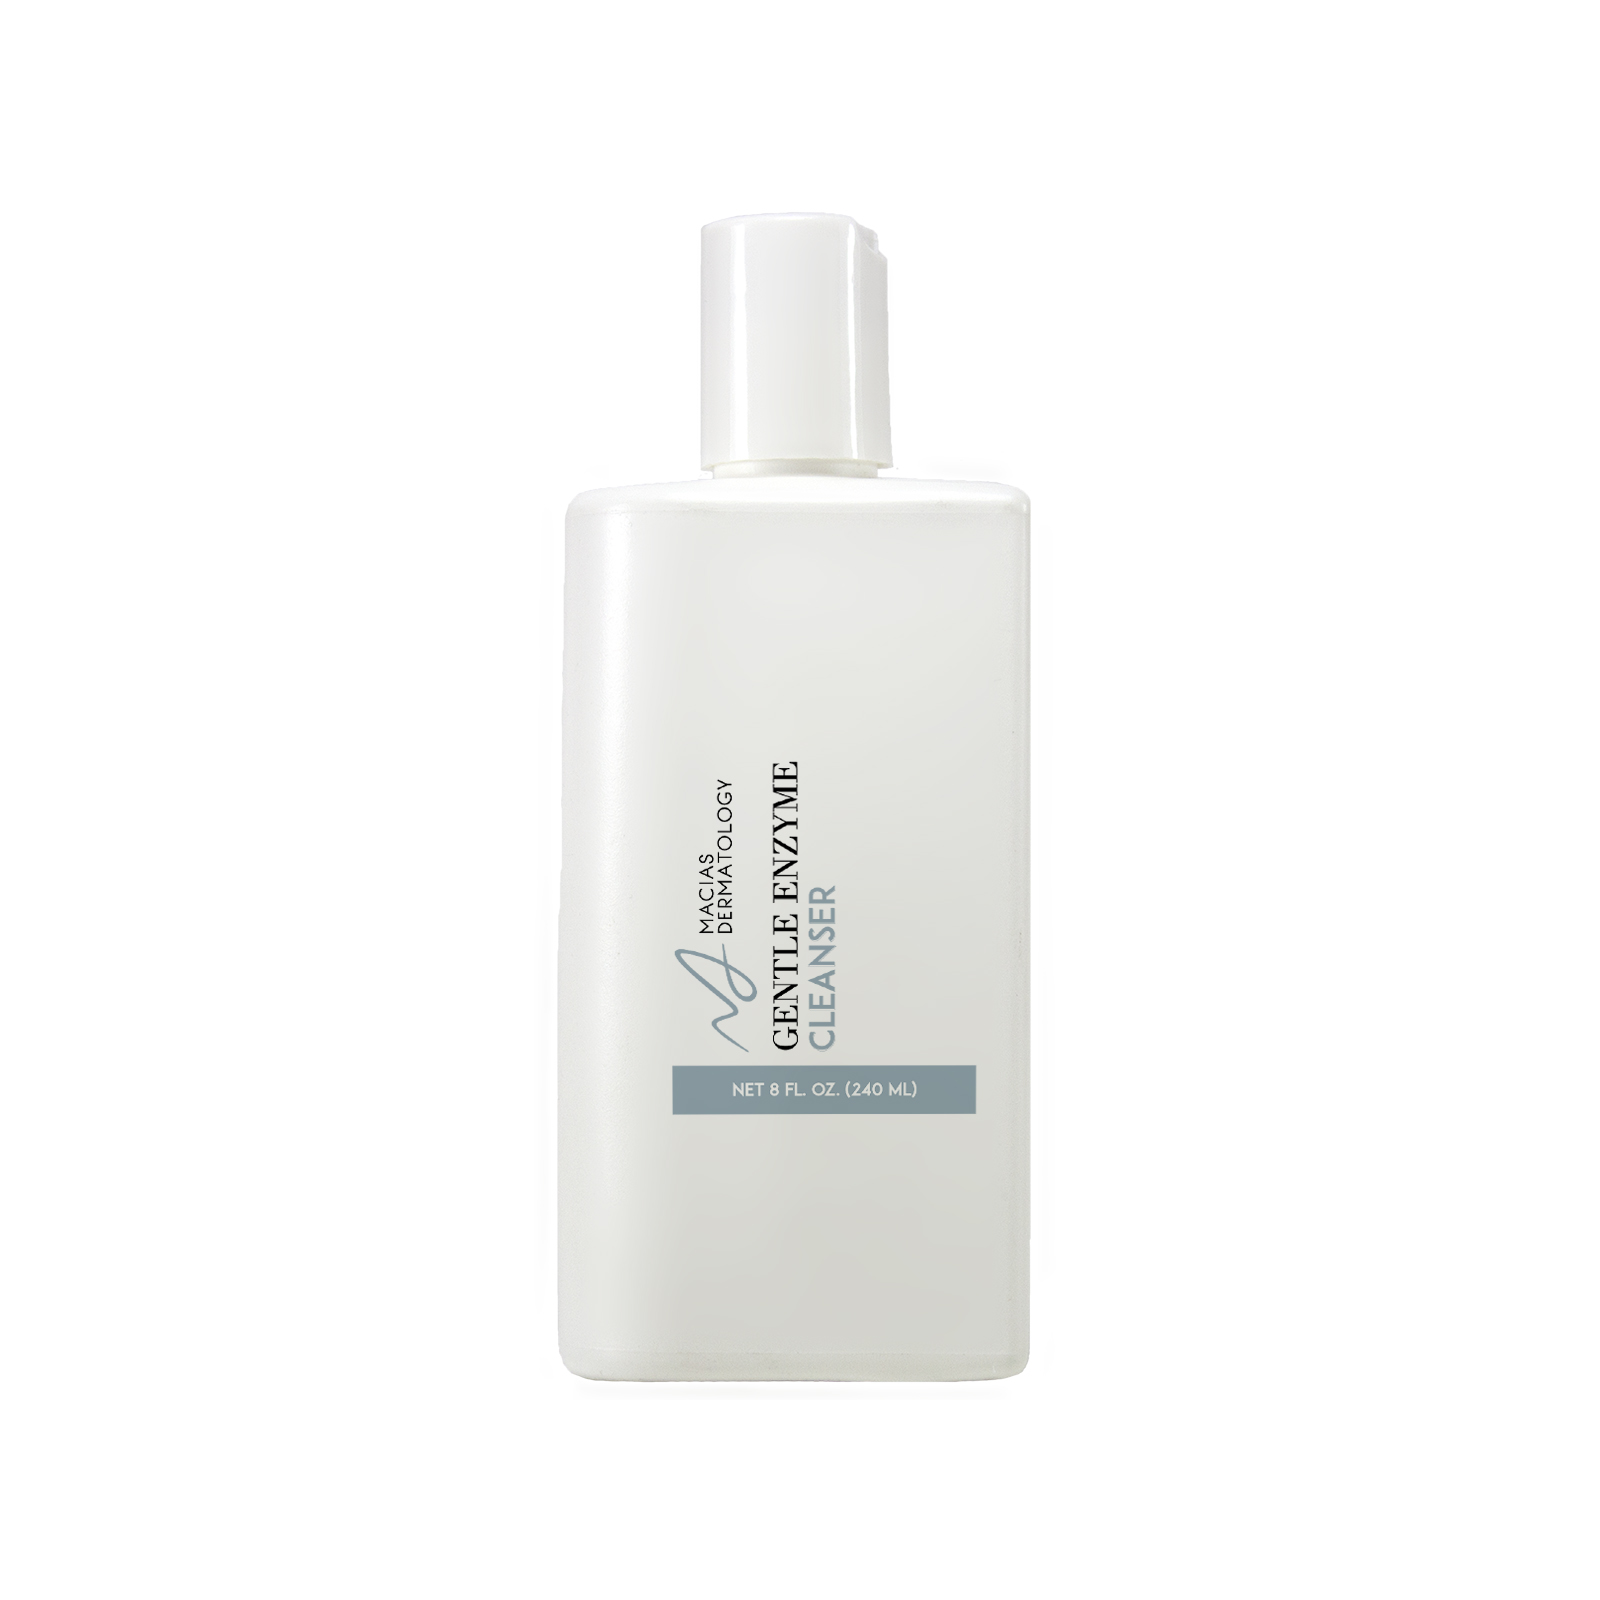 GENTLE ENZYME CLEANSER